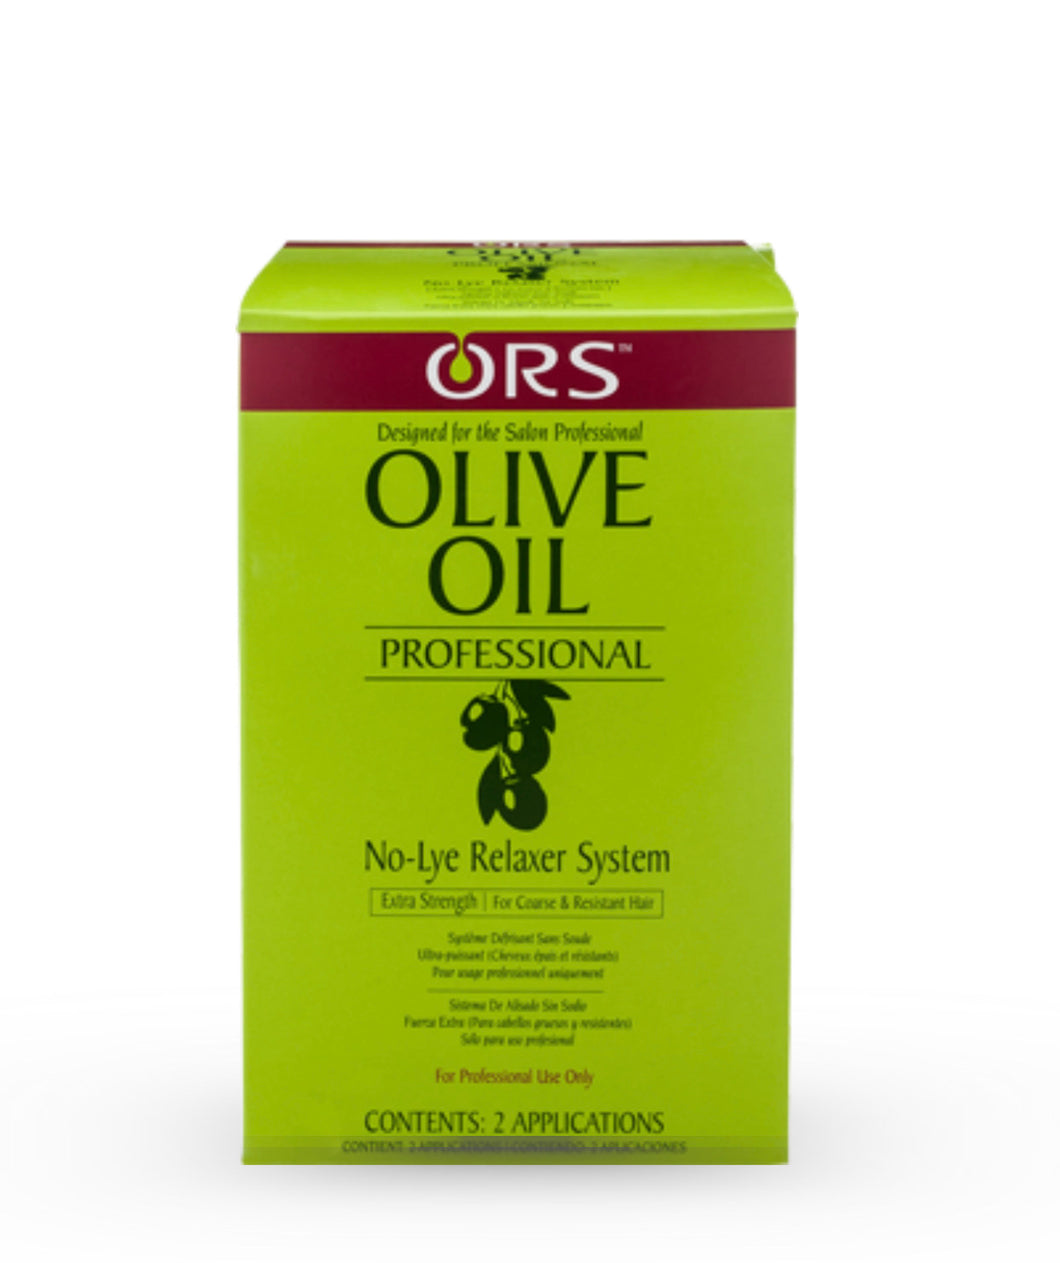 ORS Olive Oil Professional No Lye Relaxer System Extra Strength 2 Applications